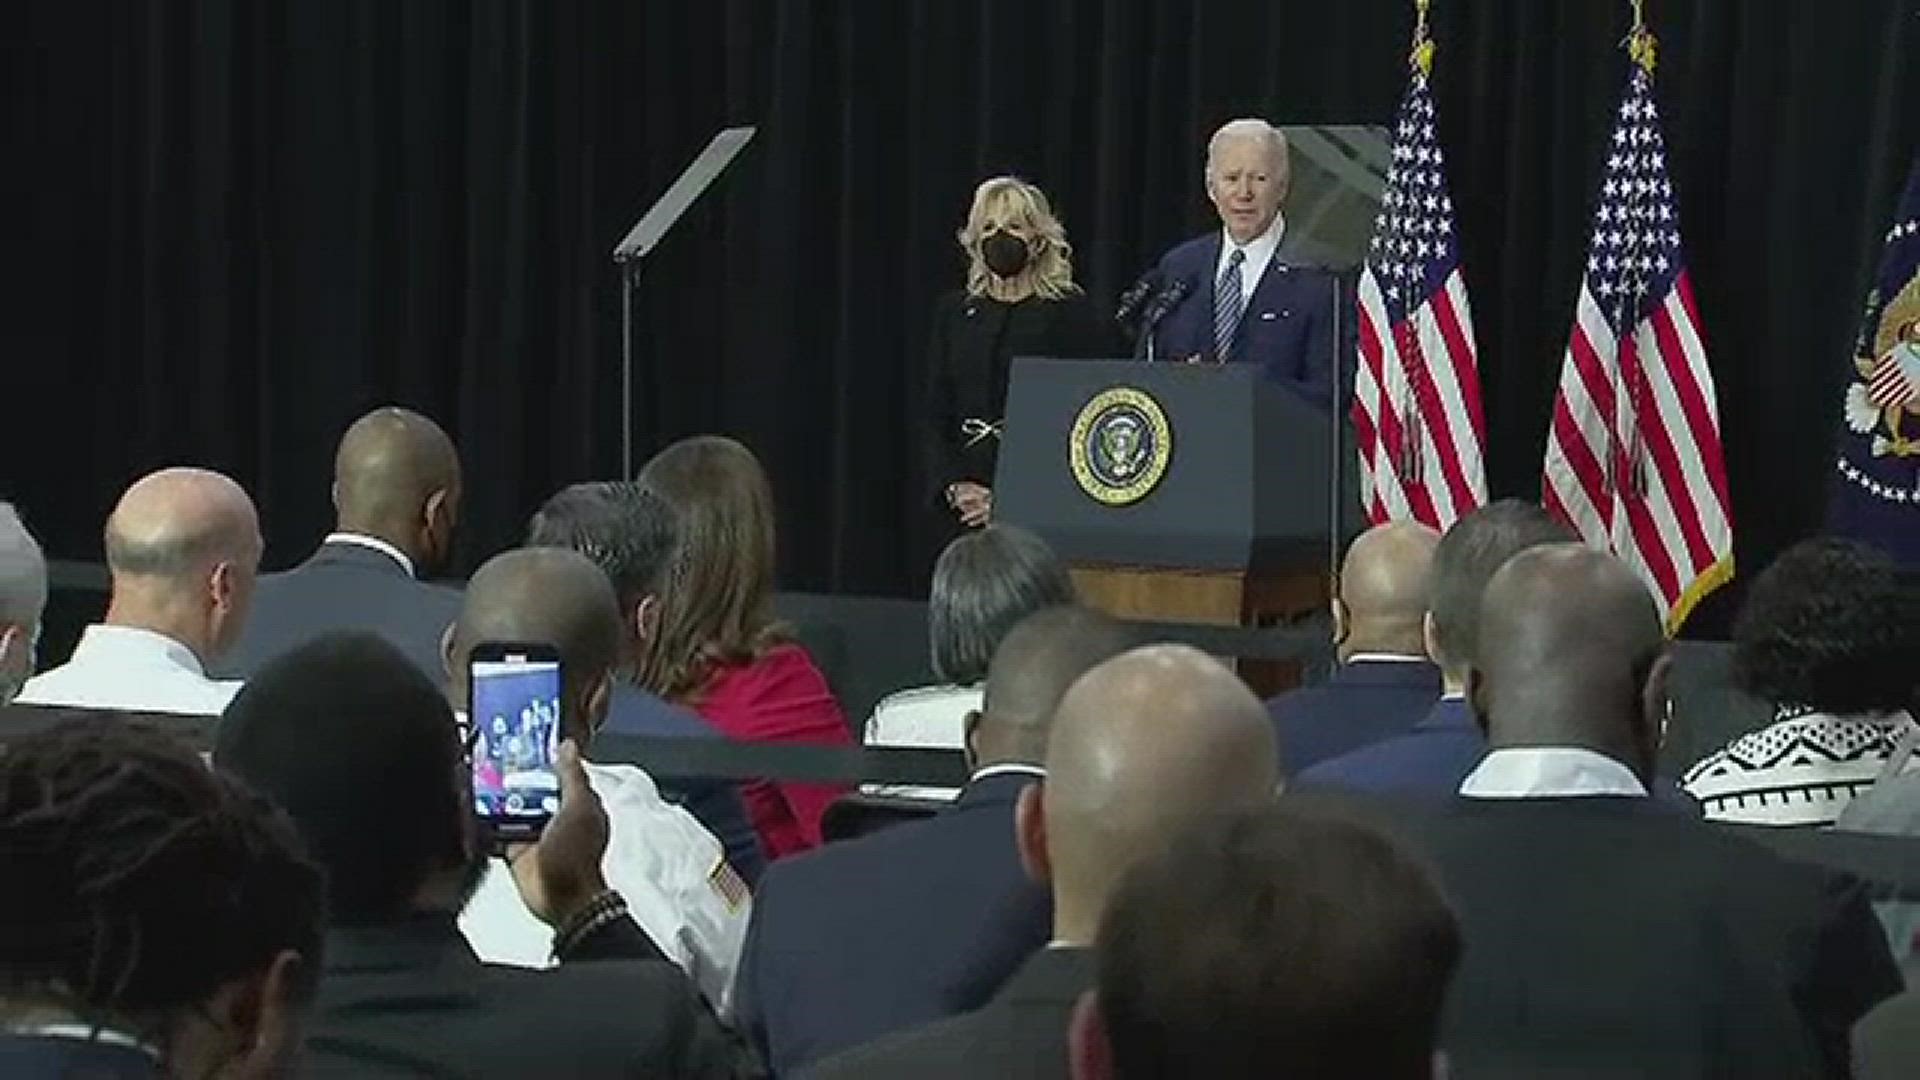 President Joe Biden and first lady Jill Biden paid their respects Tuesday to the 10 people killed in the white supremacist attack in Buffalo.